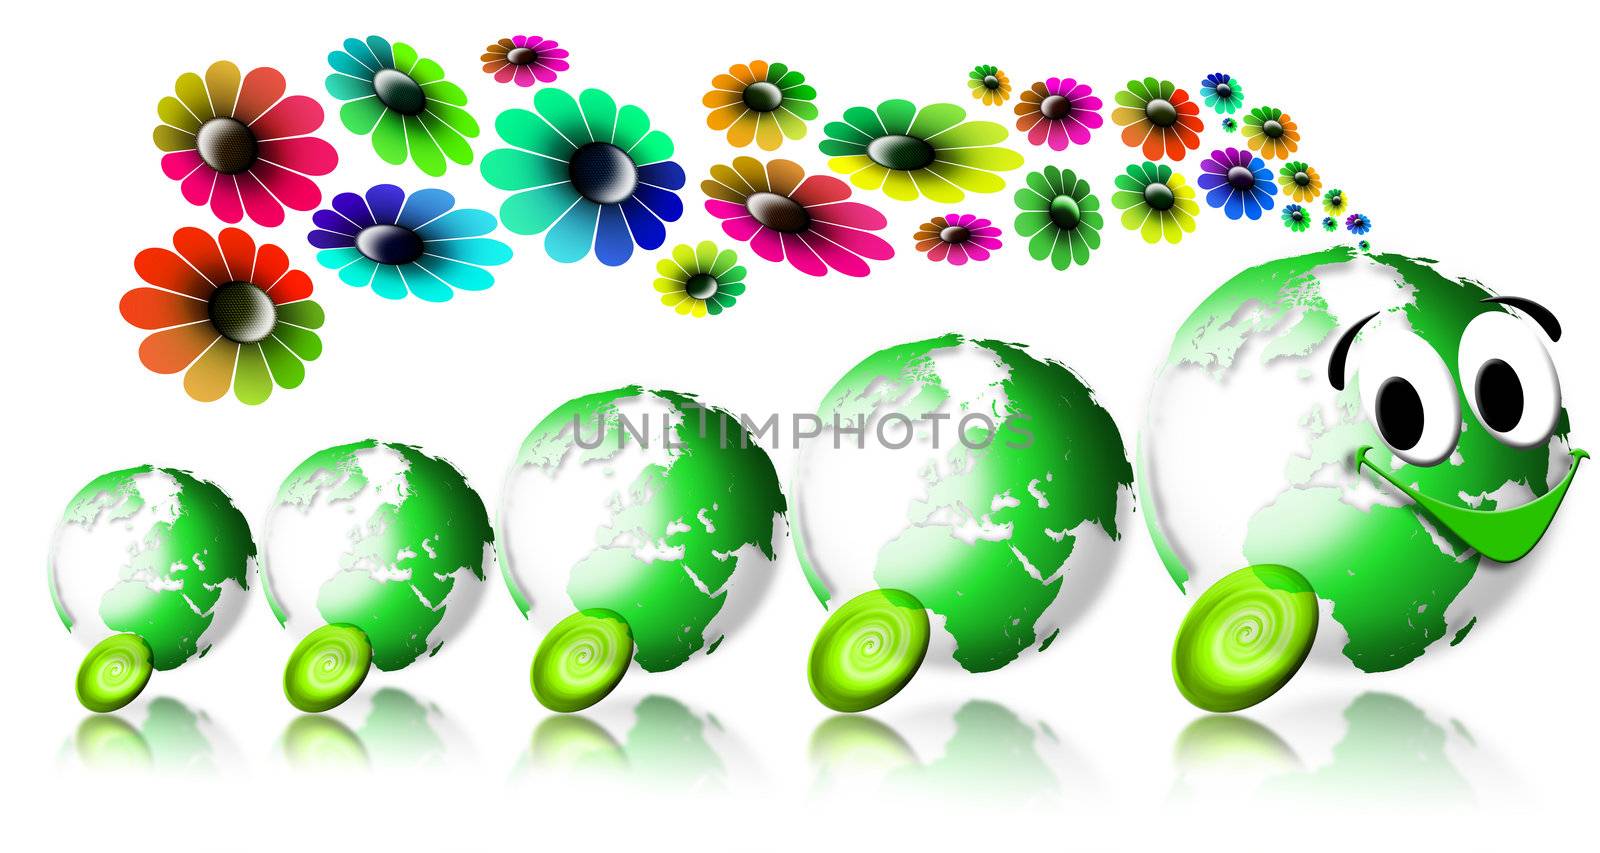 Locomotive smiling with 4 green globes and flowers coming out the chimney